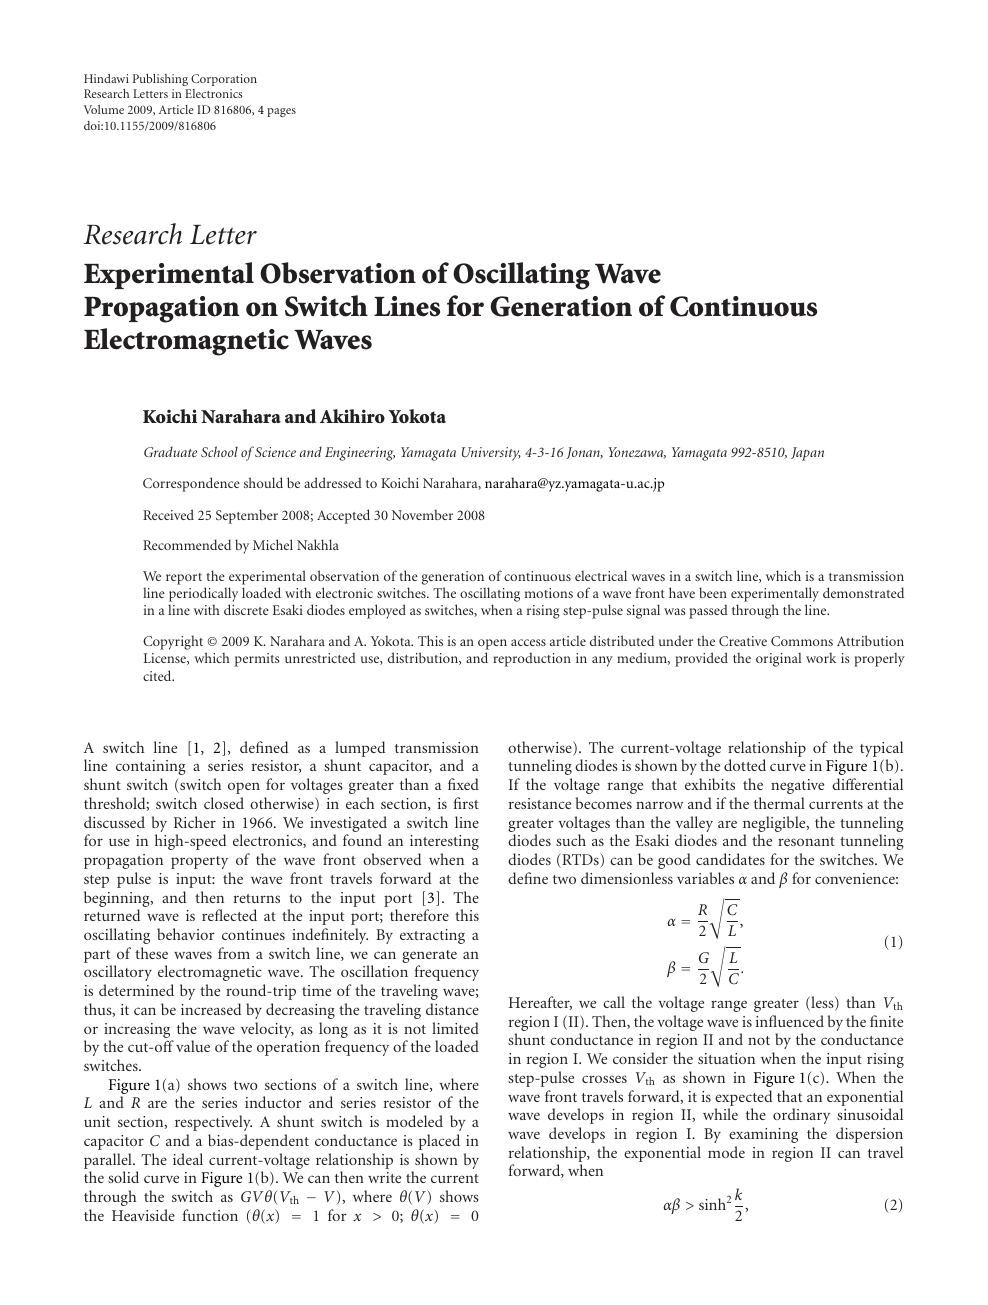 Experimental Observation Of Oscillating Wave Propagation On Switch Lines For Generation Of Continuous Electromagnetic Waves Topic Of Research Paper In Electrical Engineering Electronic Engineering Information Engineering Download Scholarly Article